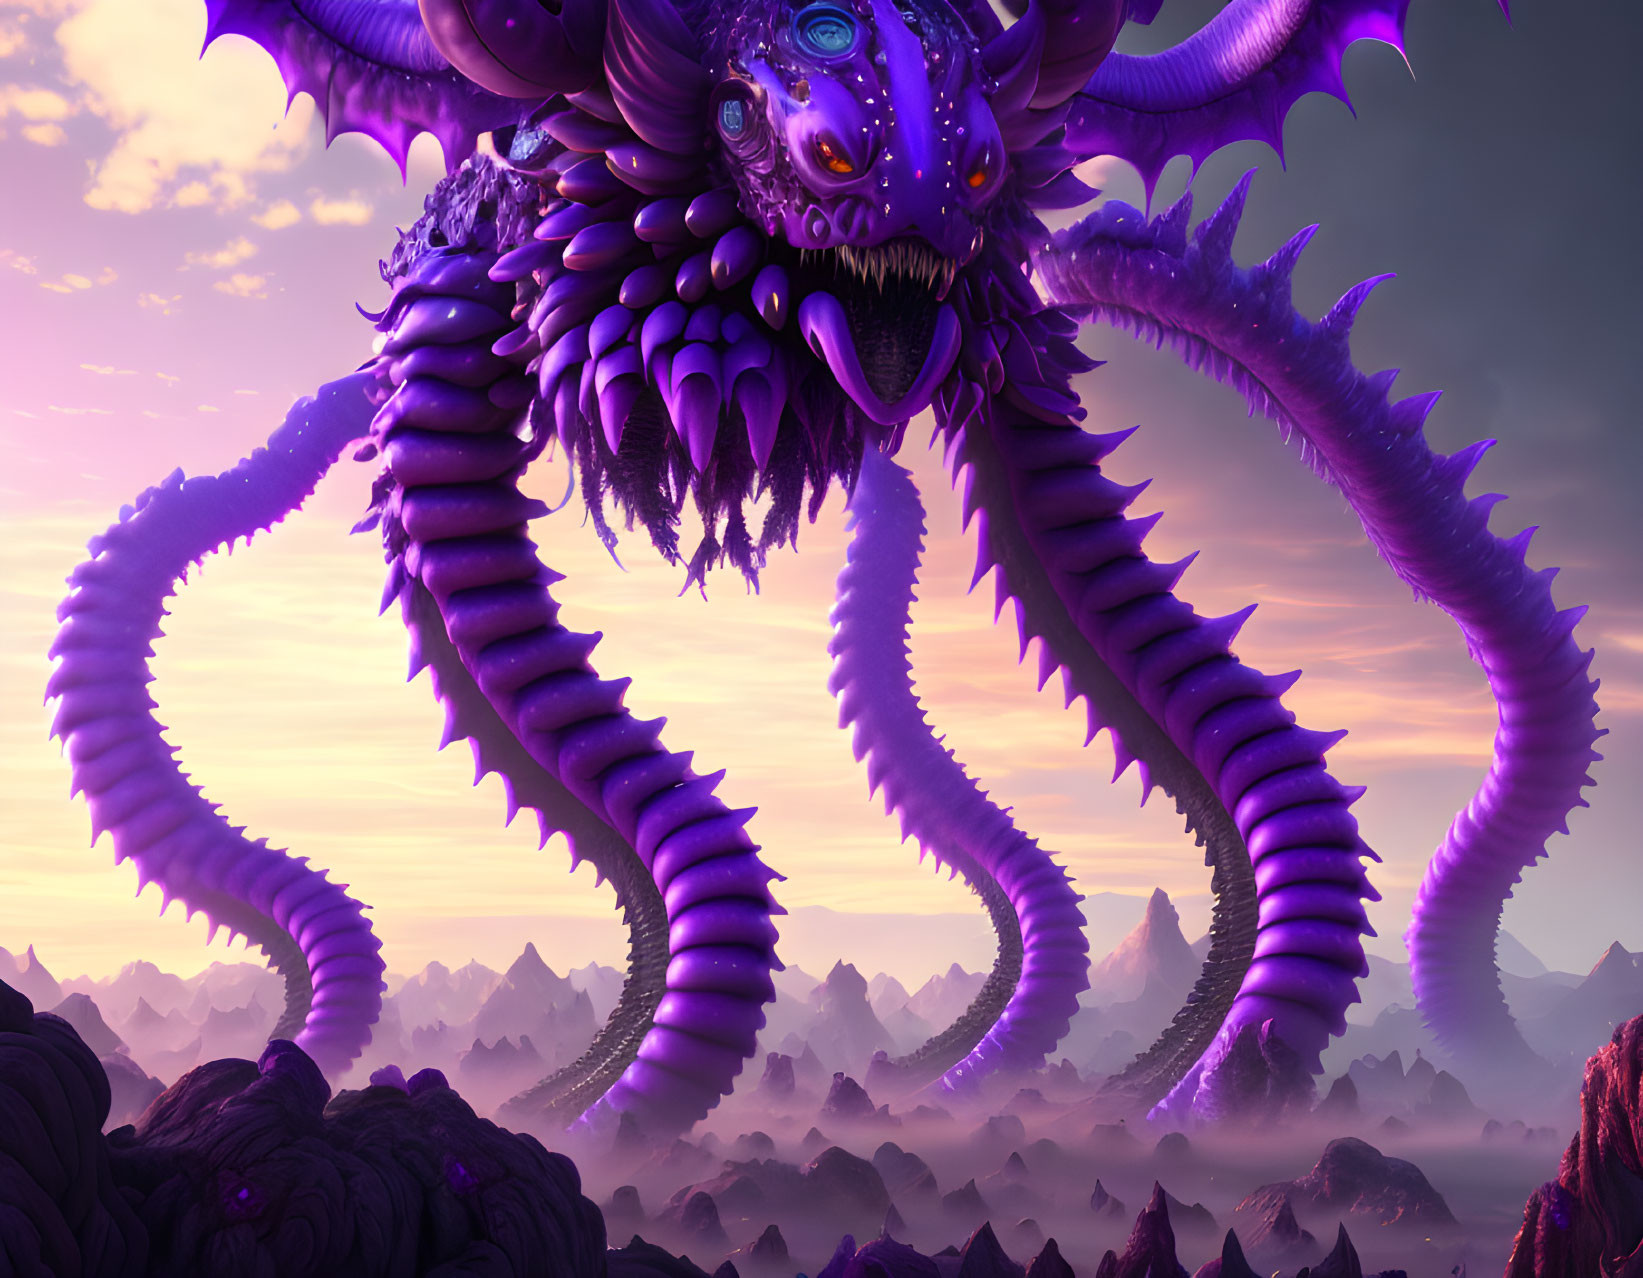 Purple octopus-like creature with multiple eyes and tentacles in alien landscape